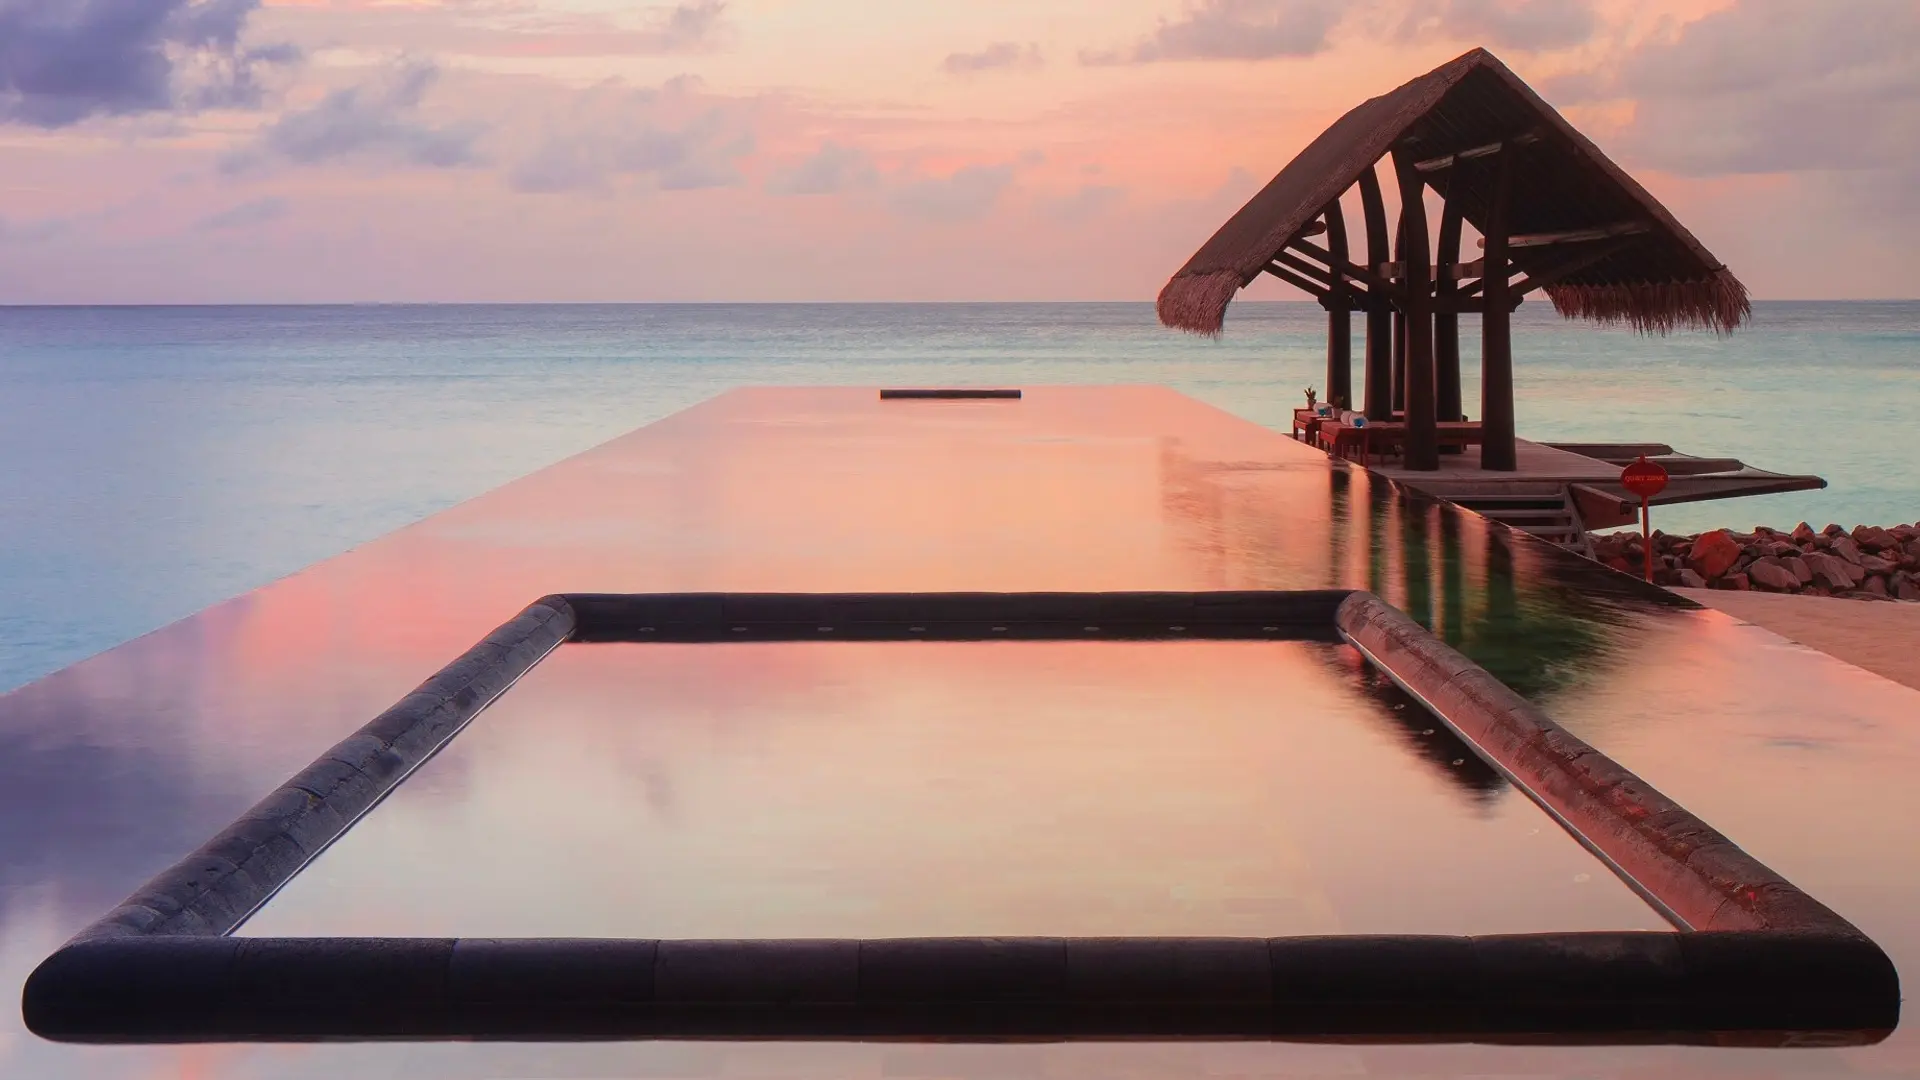 Hotel review Service & Facilities' - One&Only Reethi Rah - 0